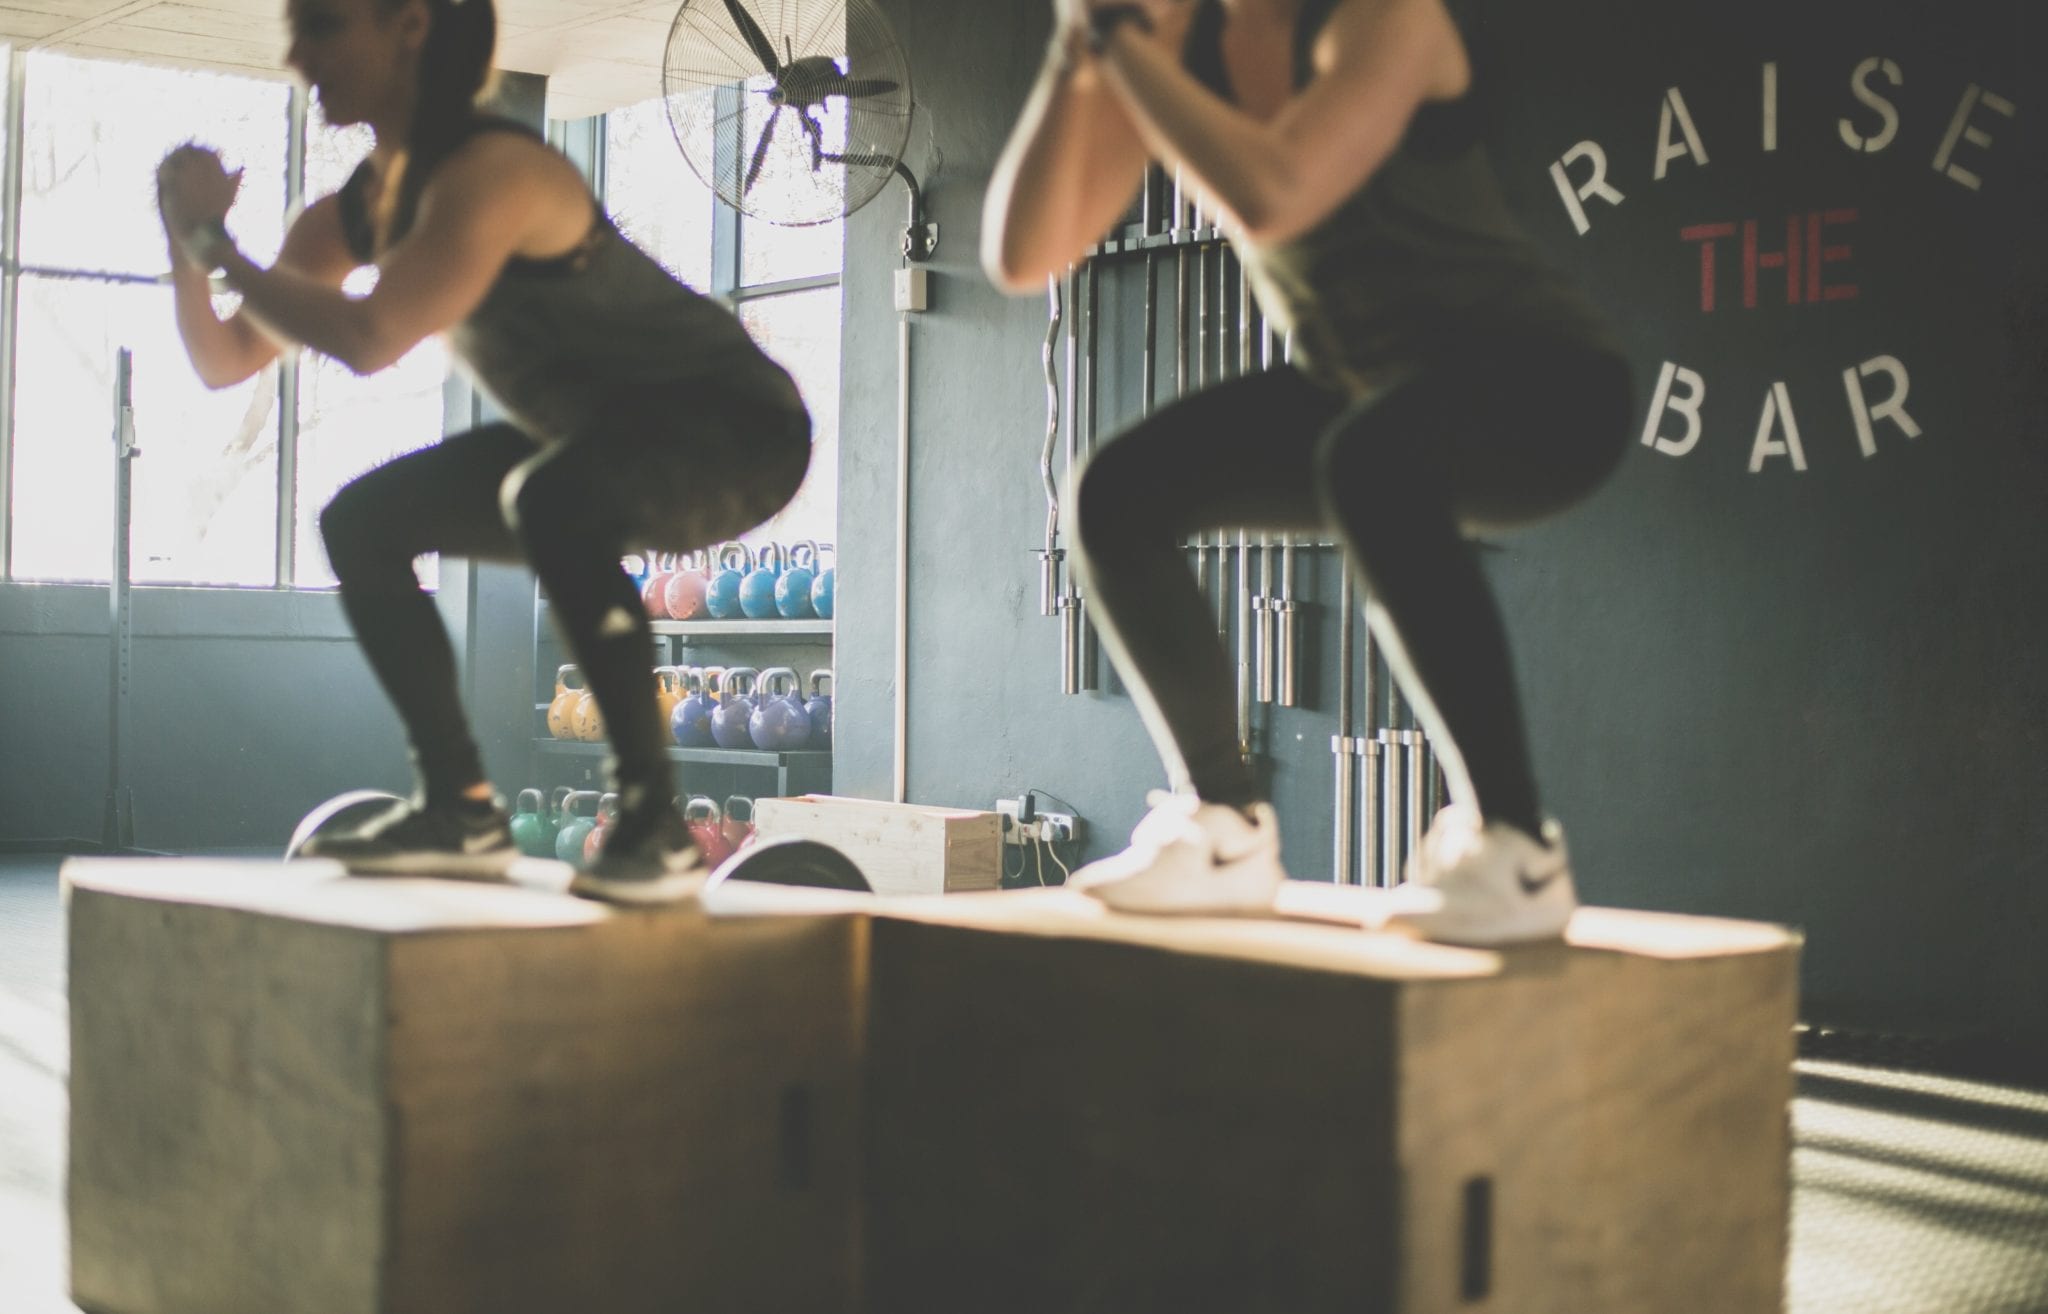 A Short Guide To High Intensity Interval Training (aka HIIT)